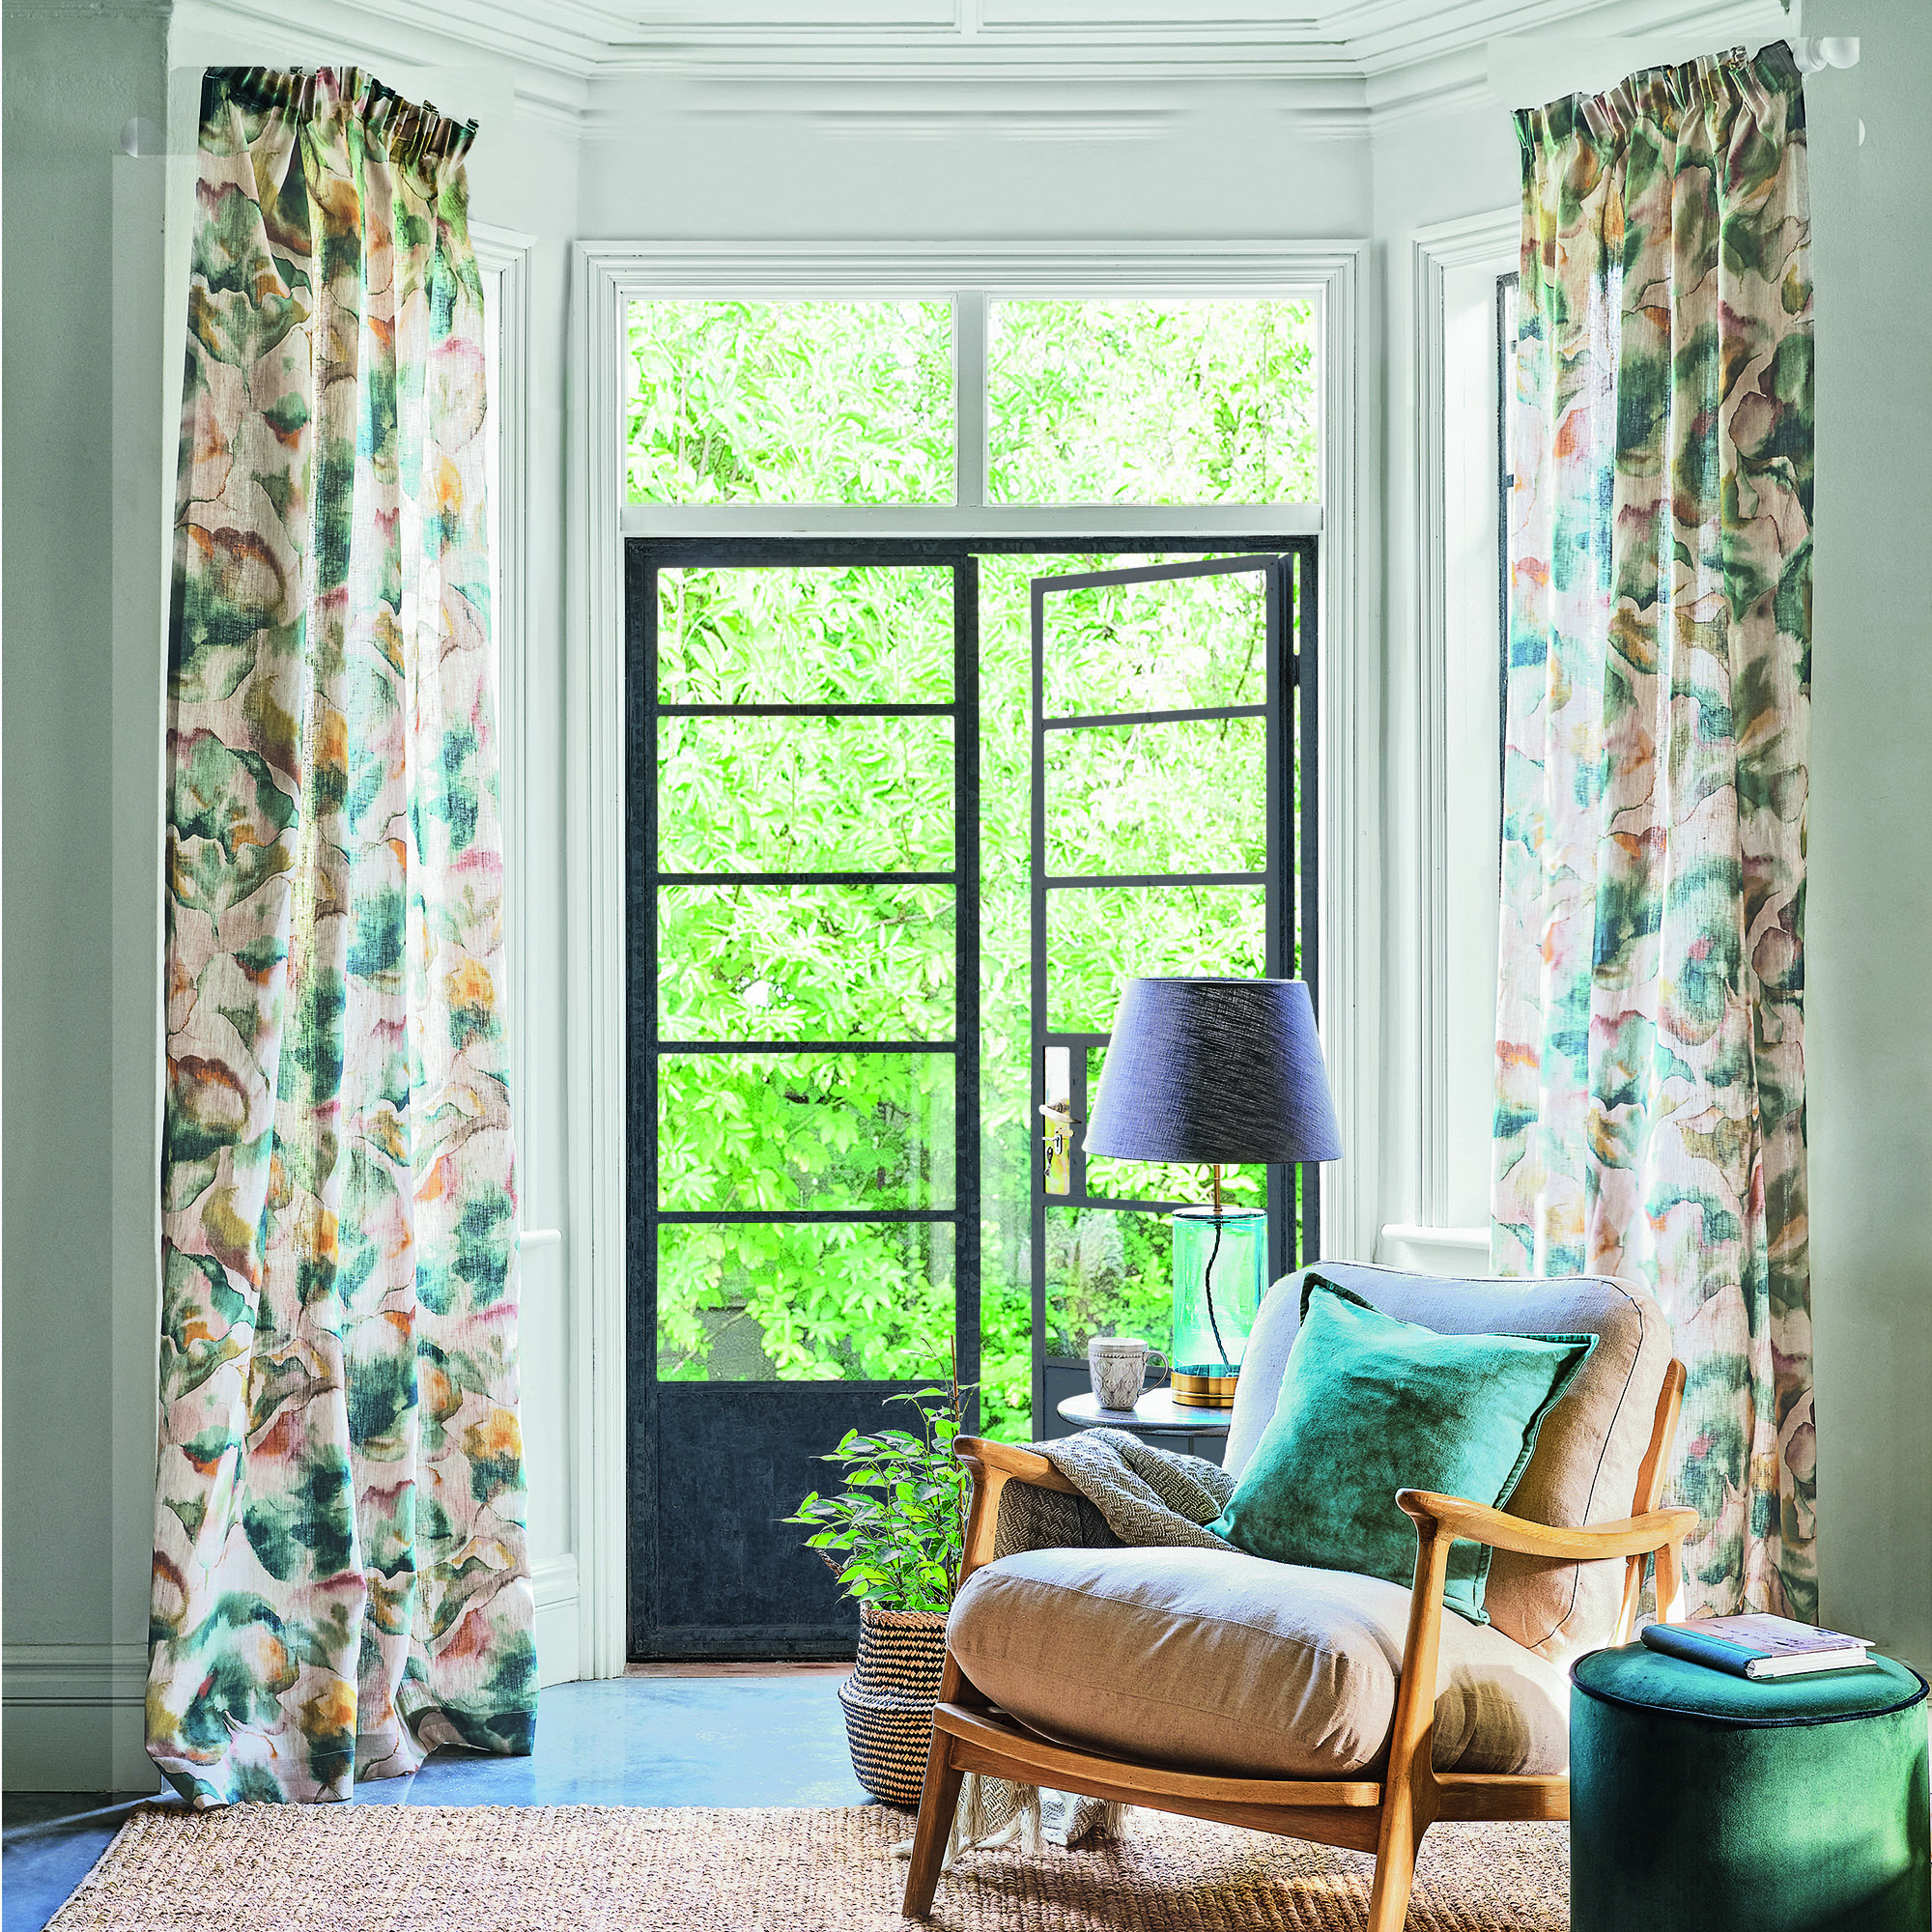 Living room with large french doors, full length curtains and an armchair.